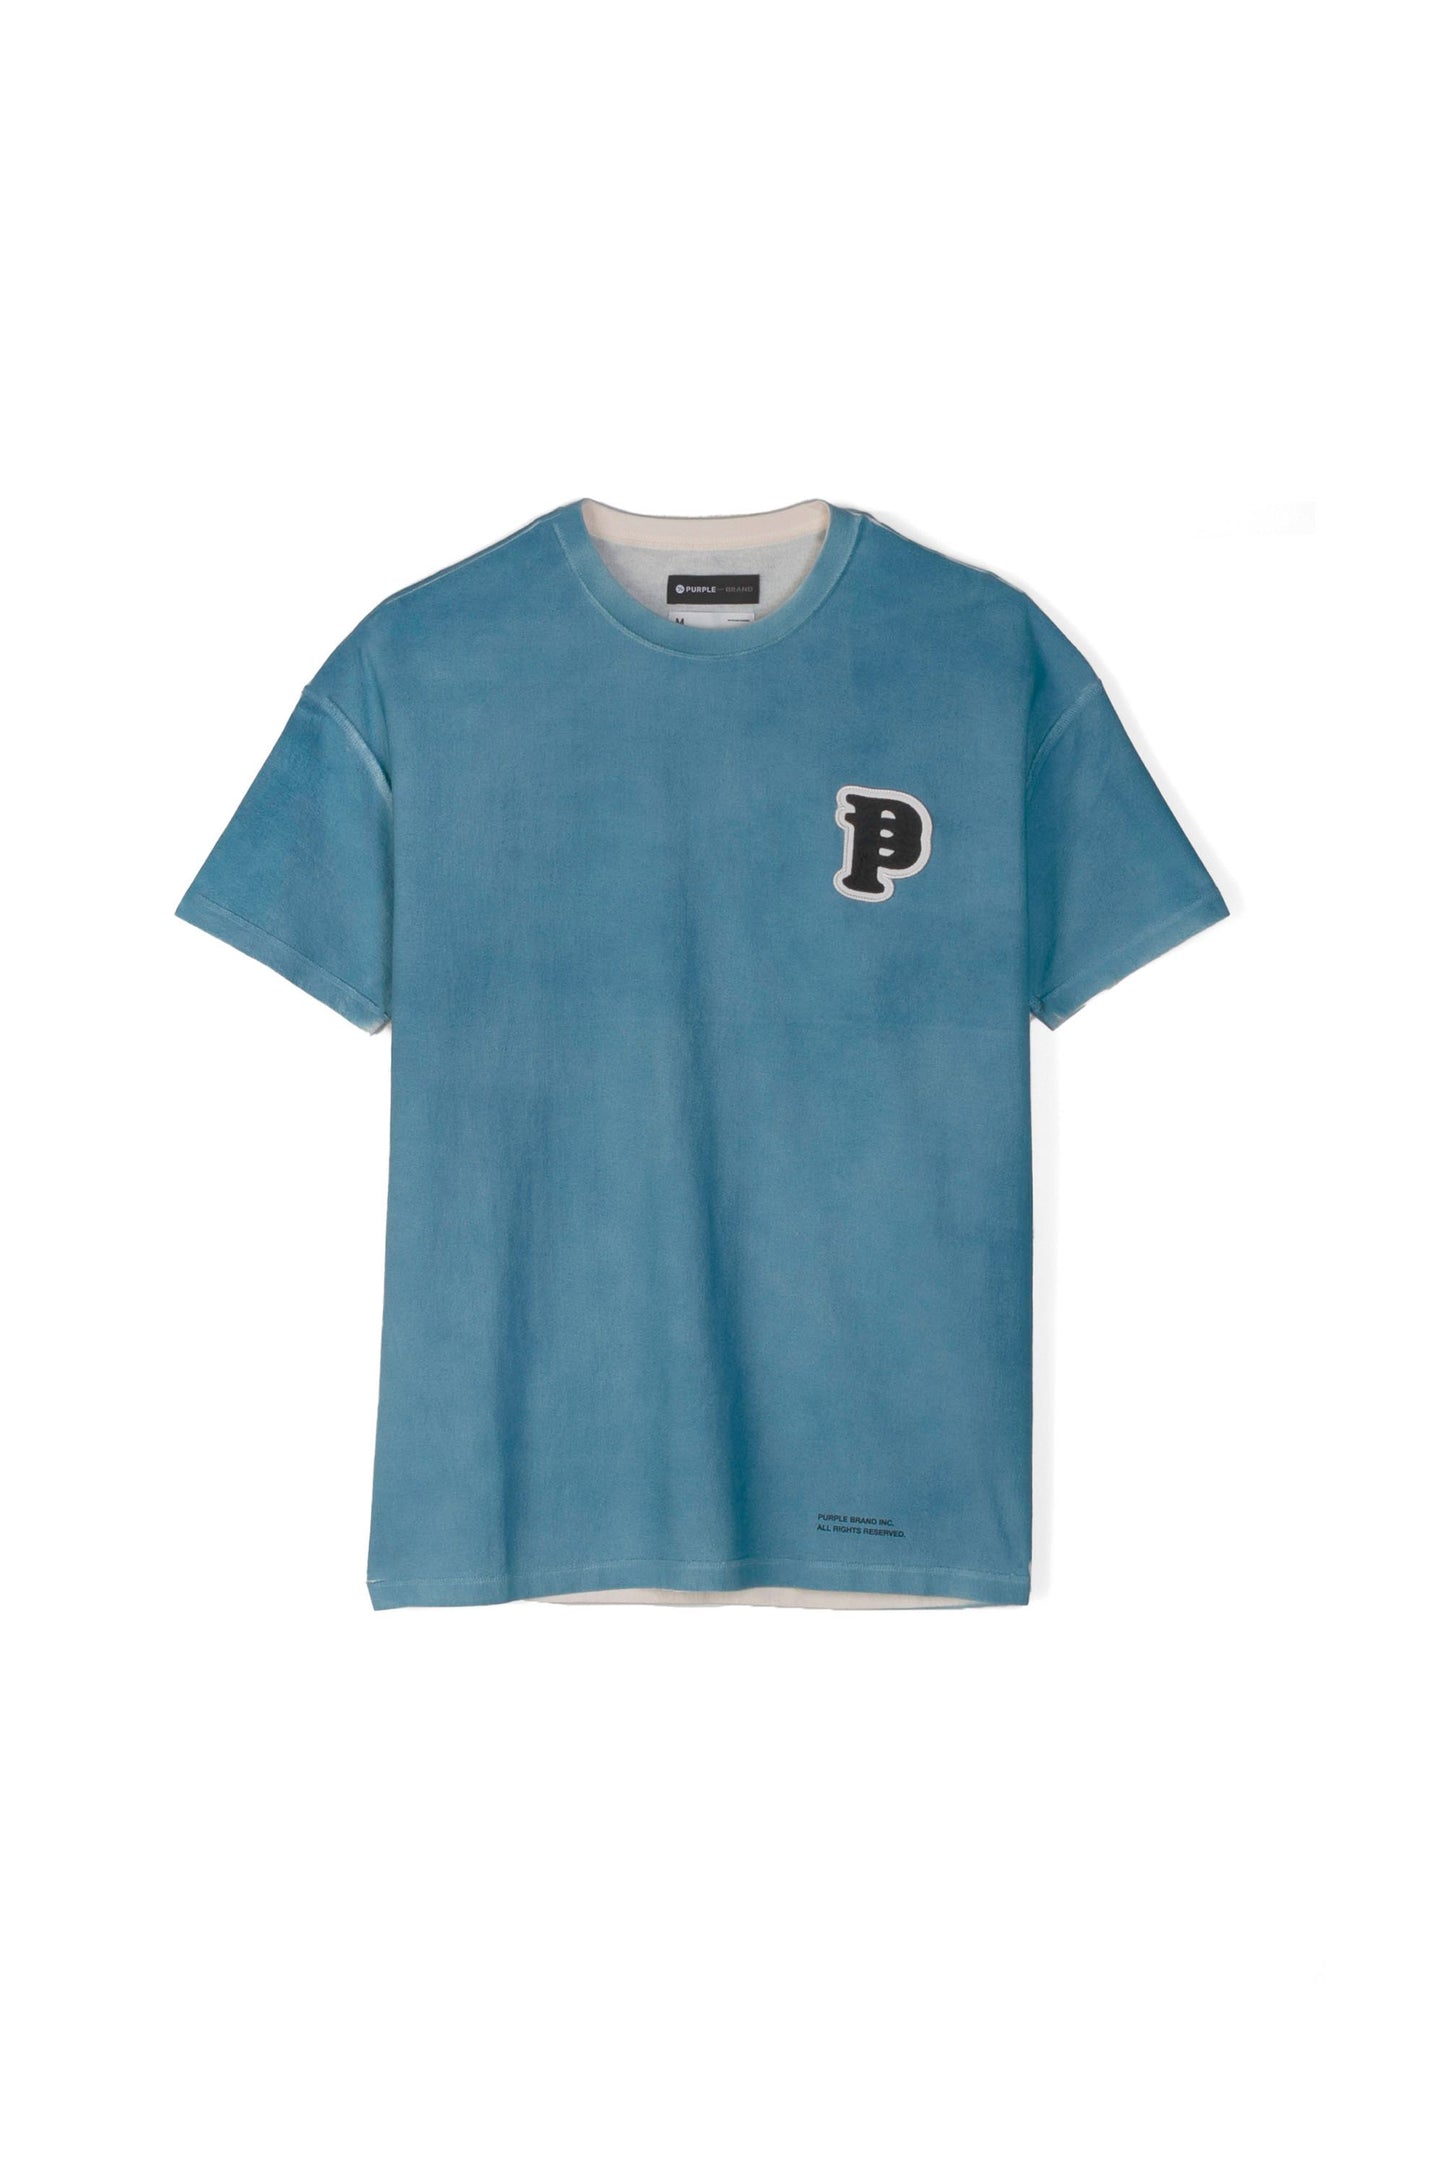 P101 RELAXED FIT TEE - SLATE BLUE SPRAY